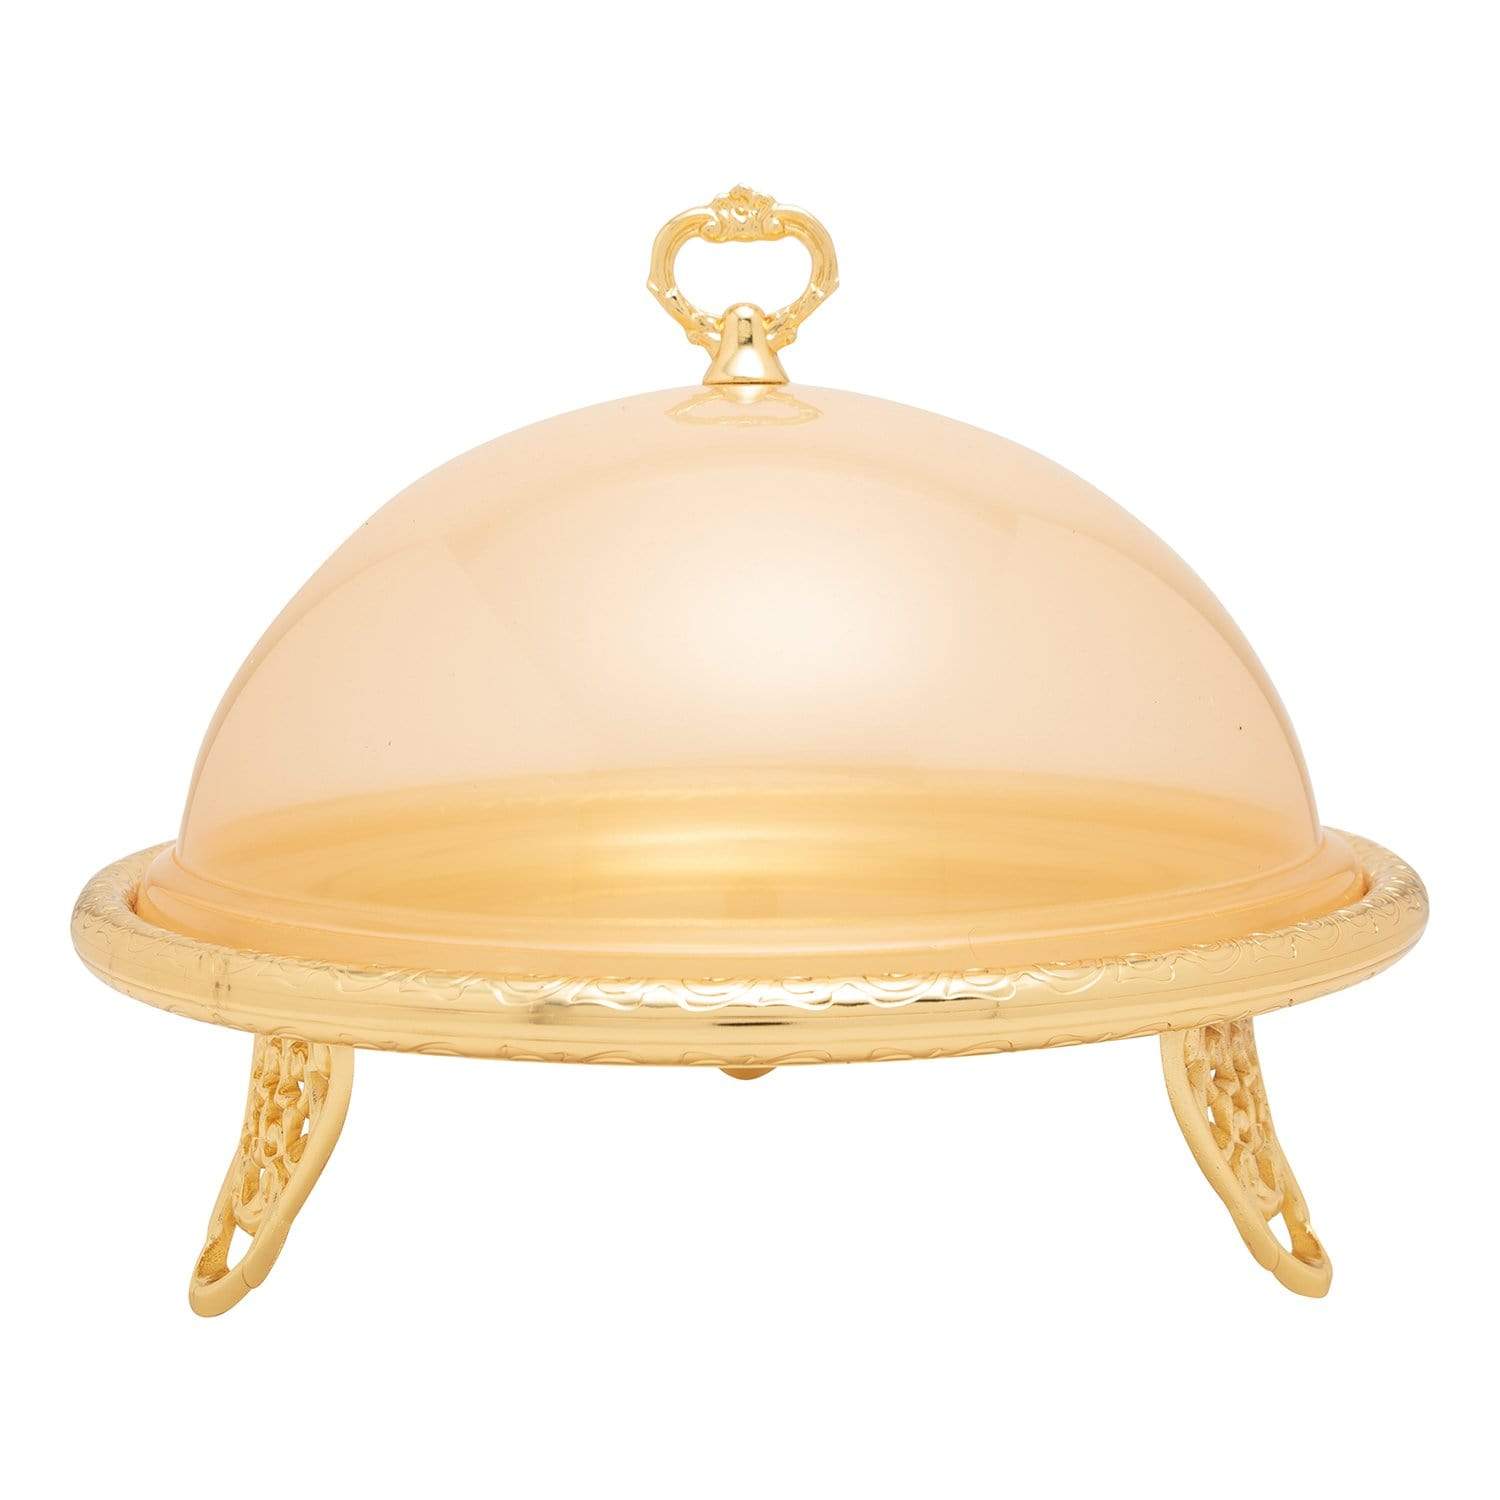 GOLD PLATED CAKE STAND WITH COVER